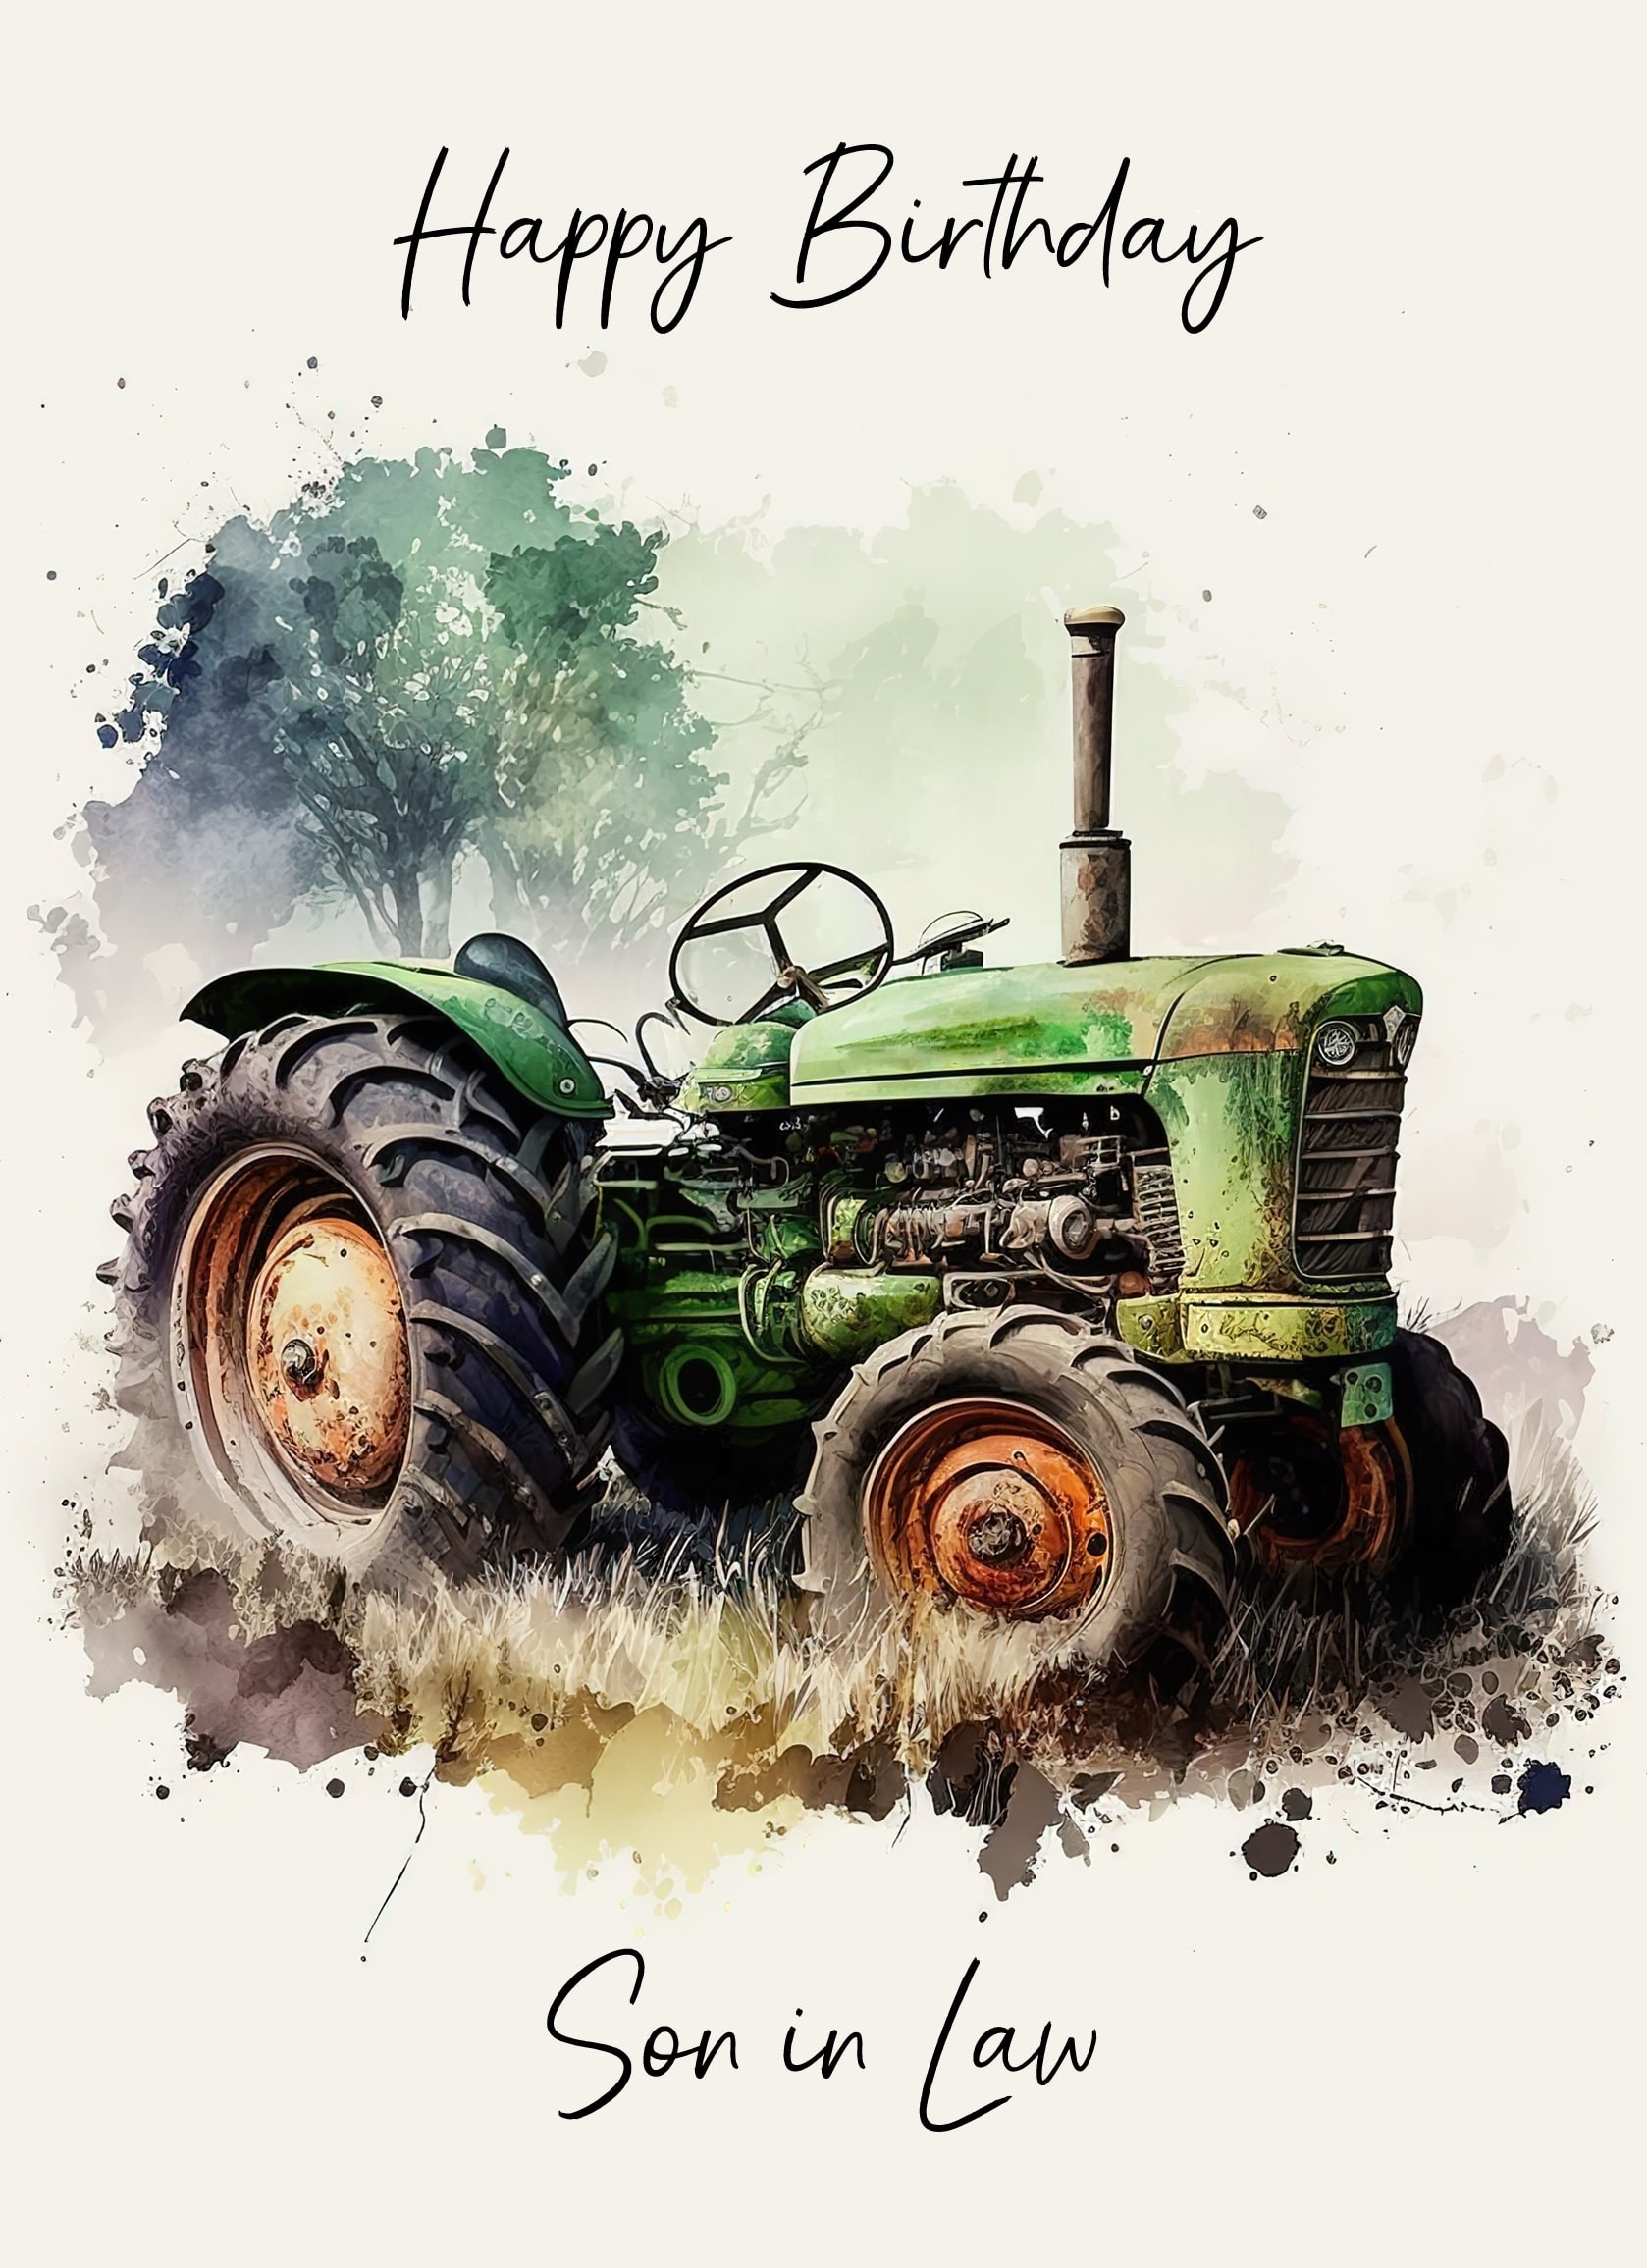 Tractor Birthday Card for Son in Law